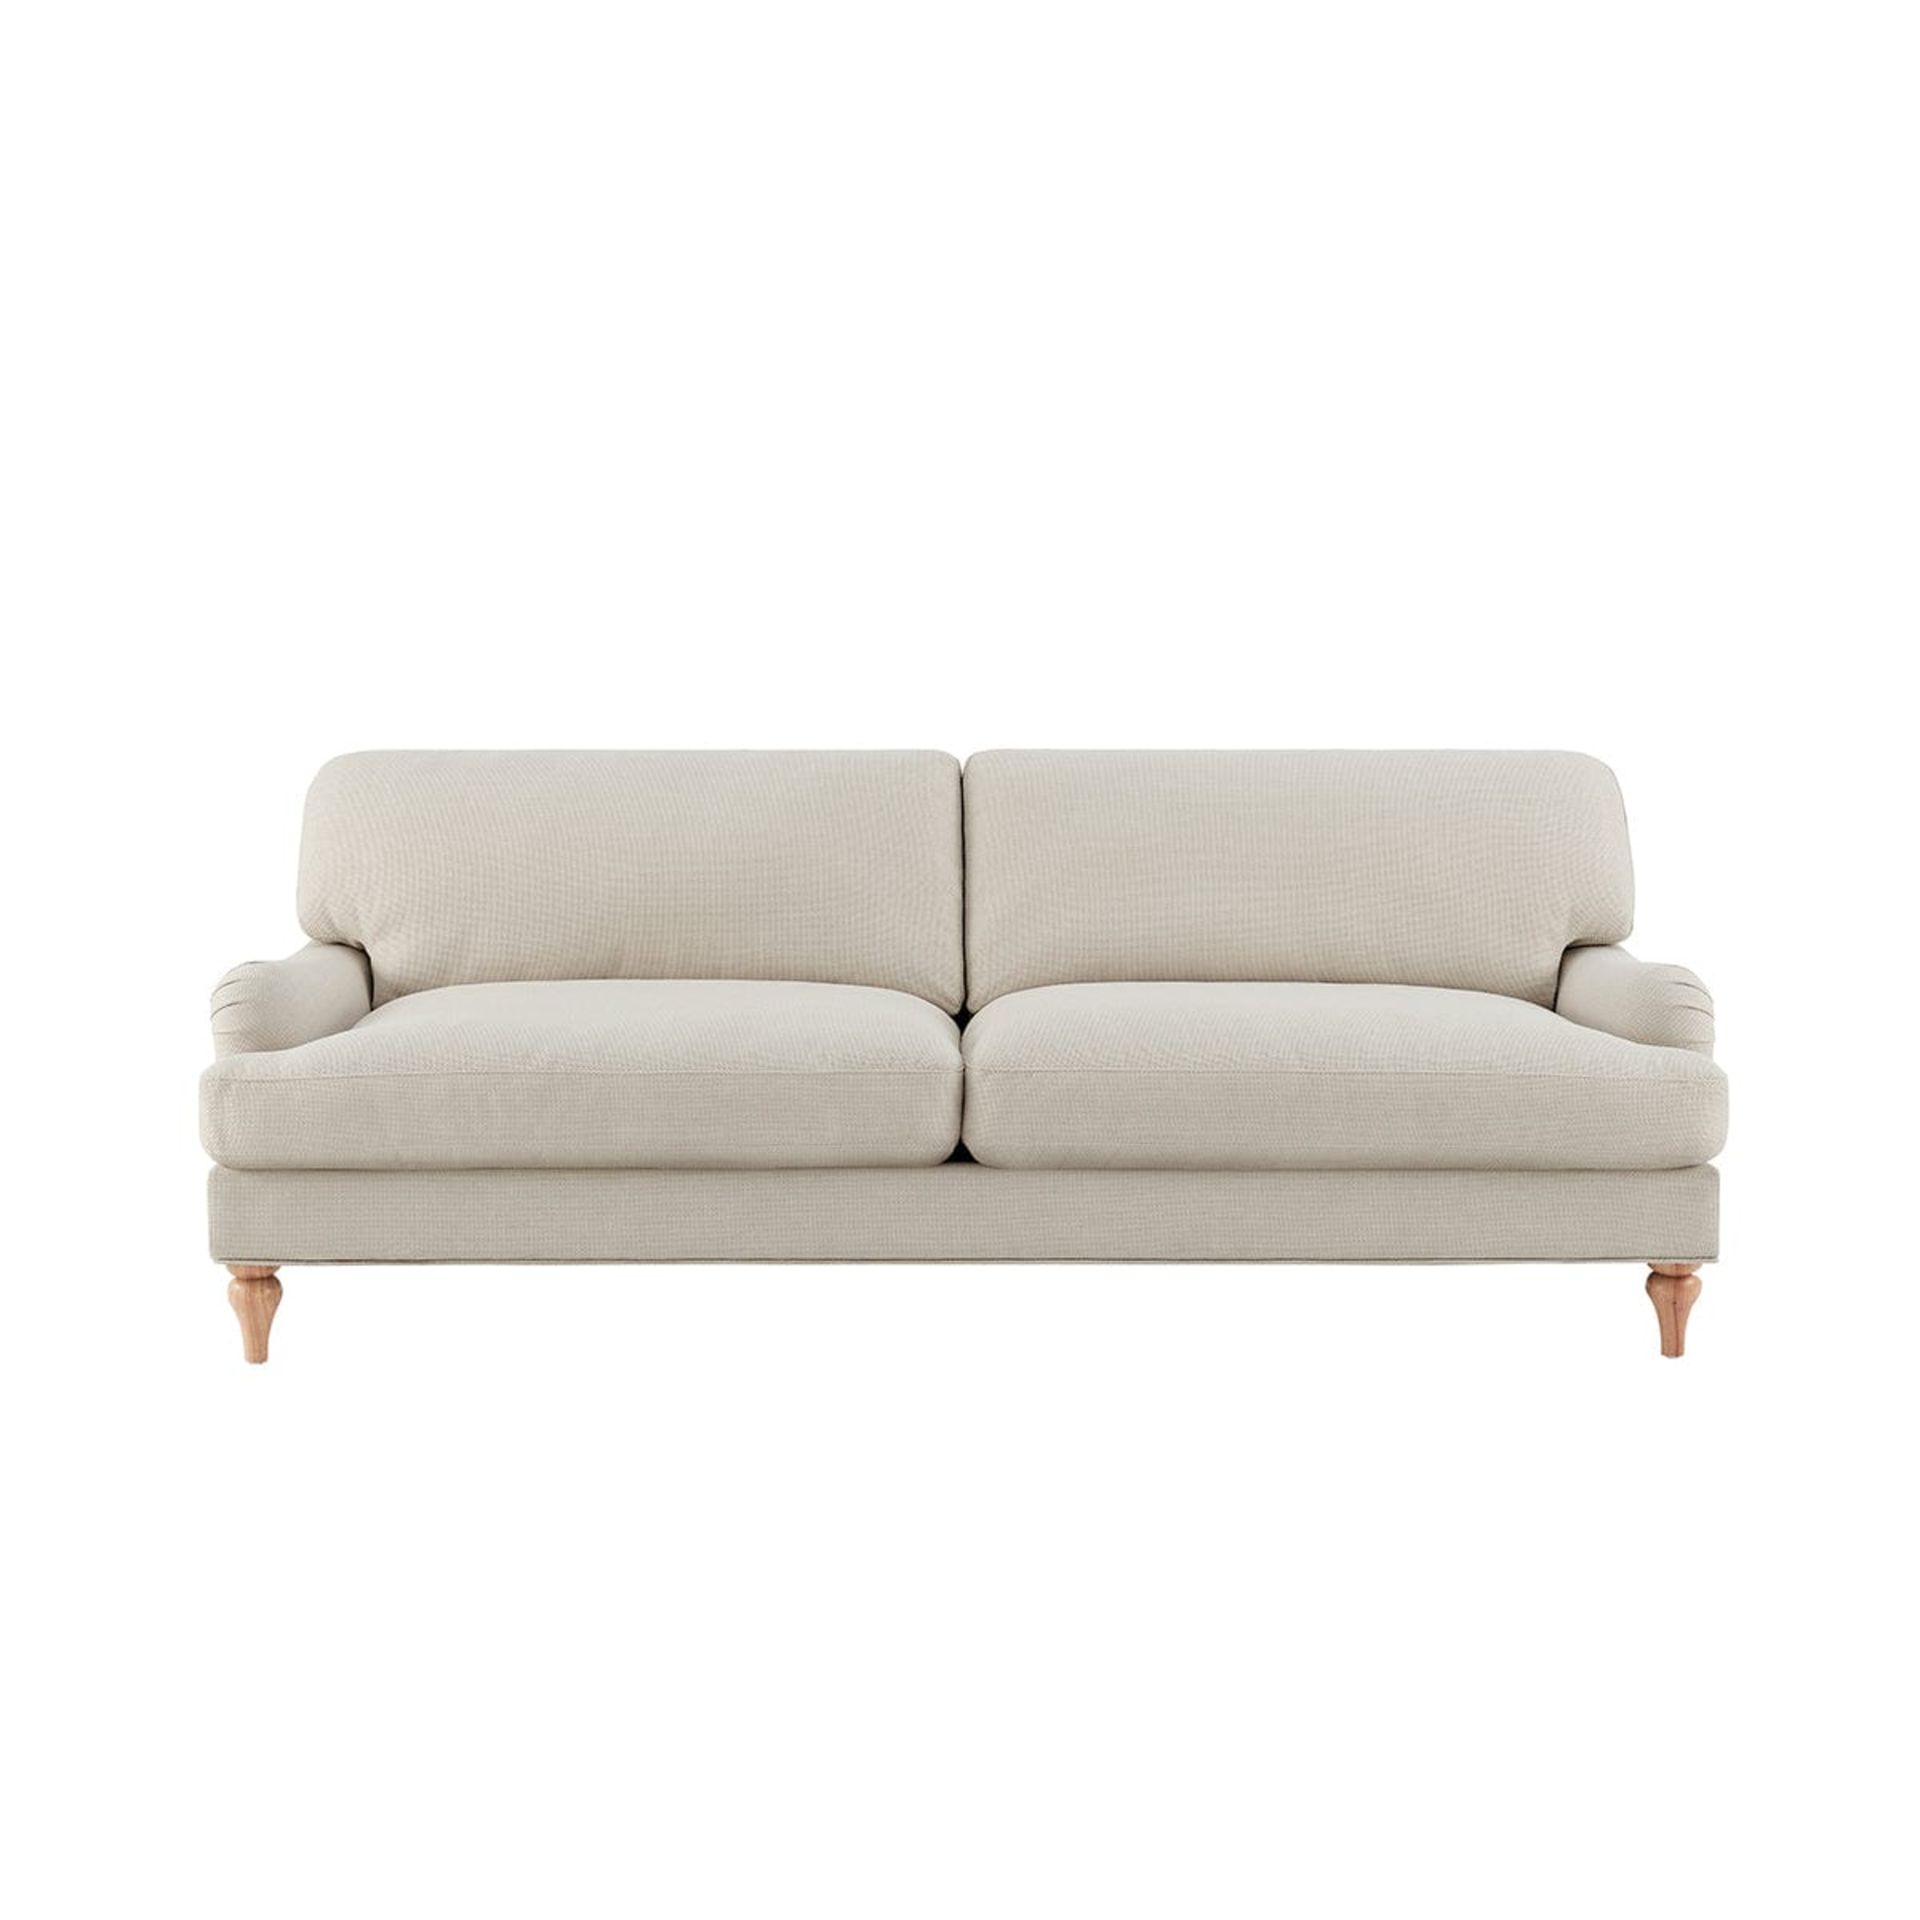 Dusk Hampshire 3 Seater Sofa - Beige RRP 899About the Product(s)Hampshire 3 Seater Sofa -